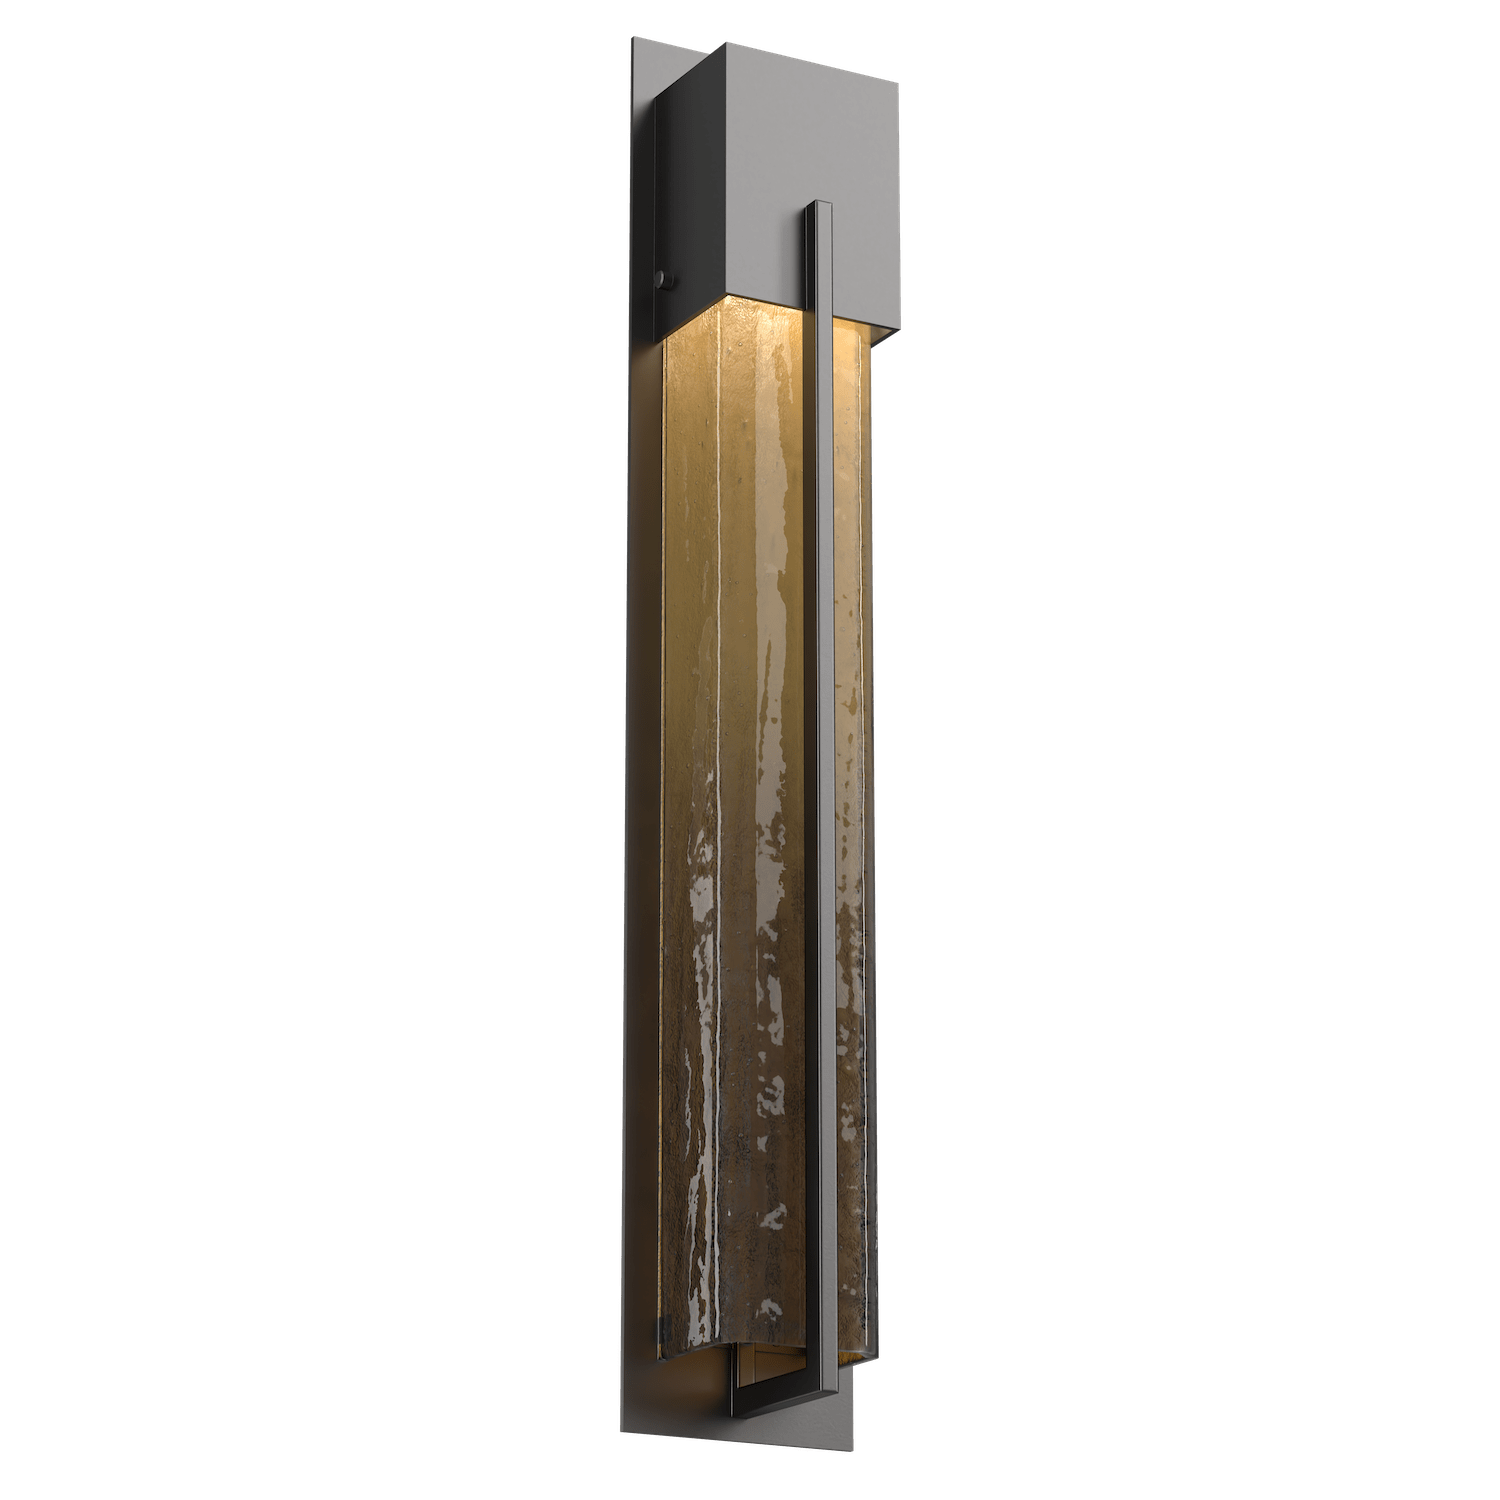 ODB0055-29-AG-BG-Hammerton-Studio-29-inch-outdoor-sconce-with-square-bronze-granite-glass-cover-with-argento-grey-finish-and-LED-lamping